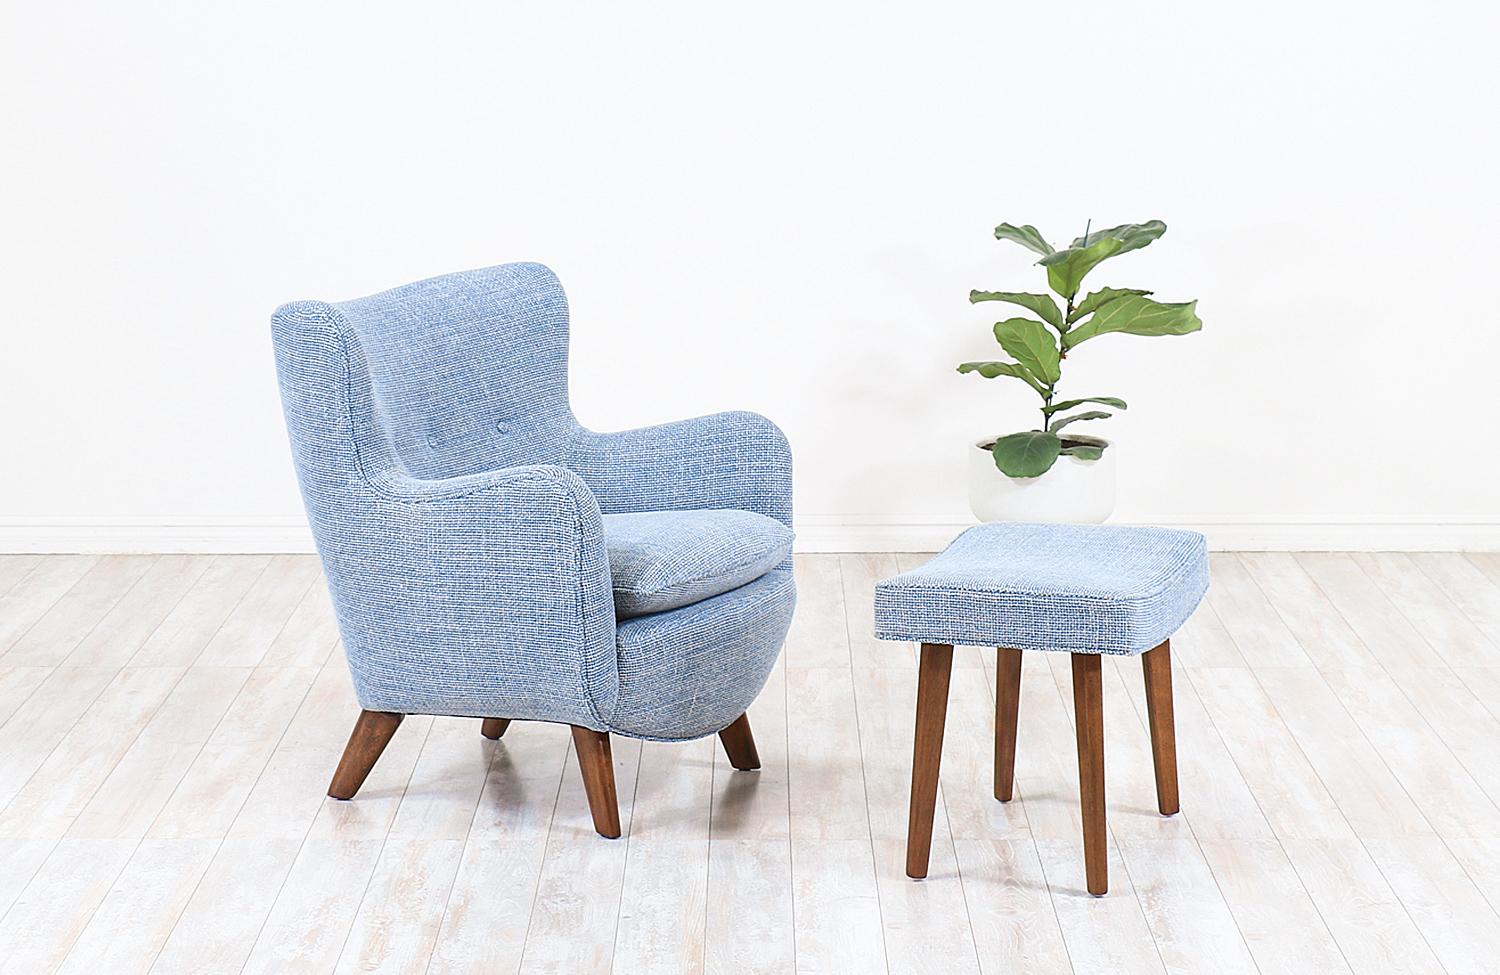 Elegant Modern lounge chair Model-4688 designed by George Nelson for Herman Miller in the United States in 1946. This iconic lounge chair with its ottoman set is crafted with solid walnut wood feet features an ergonomic seat with light-blue tweed